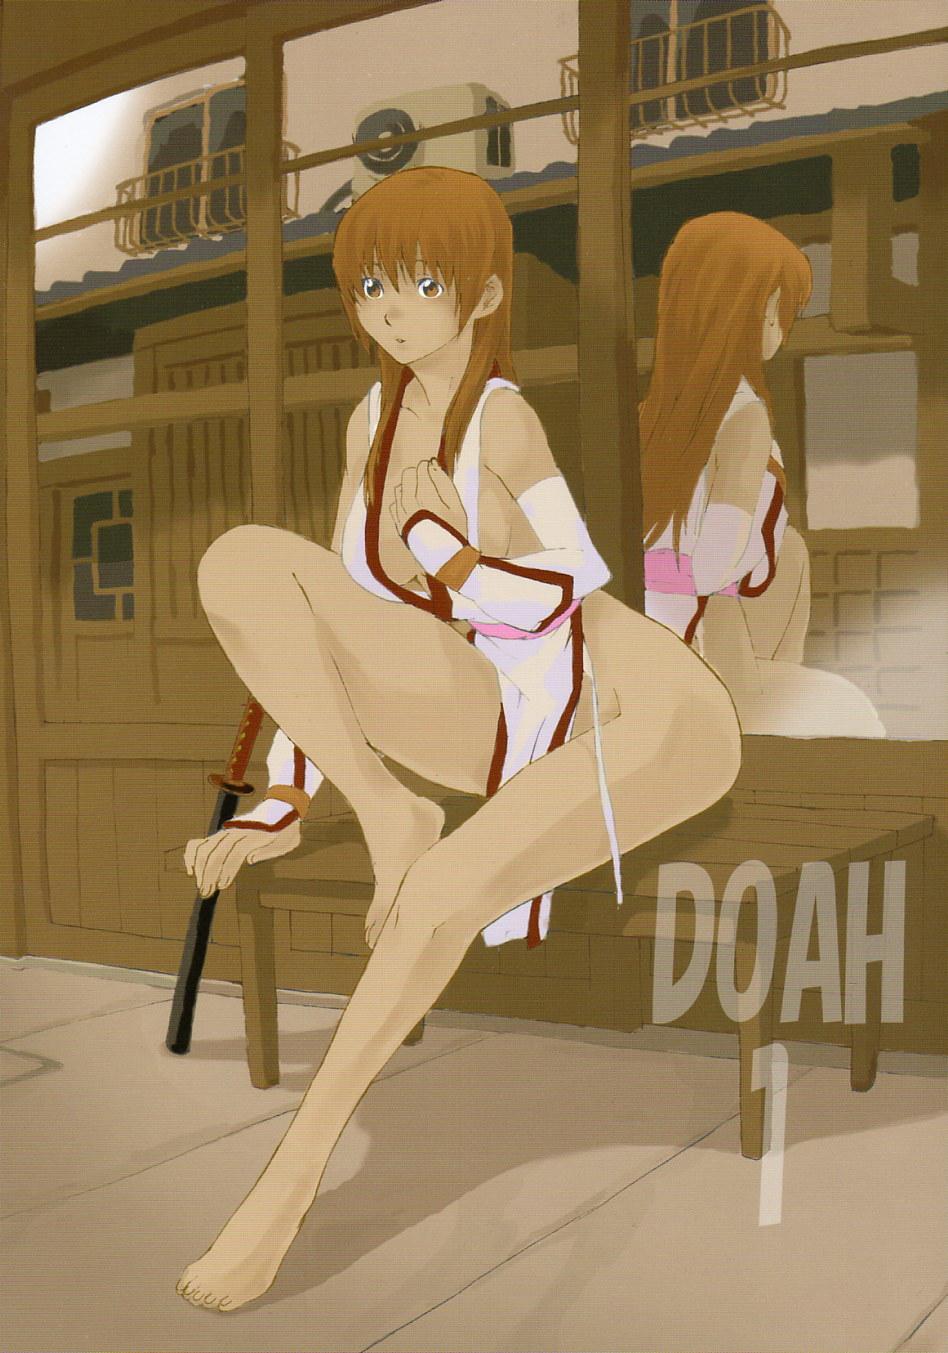 Adorable DOAH 1 - Dead or alive Foot Worship - Page 1